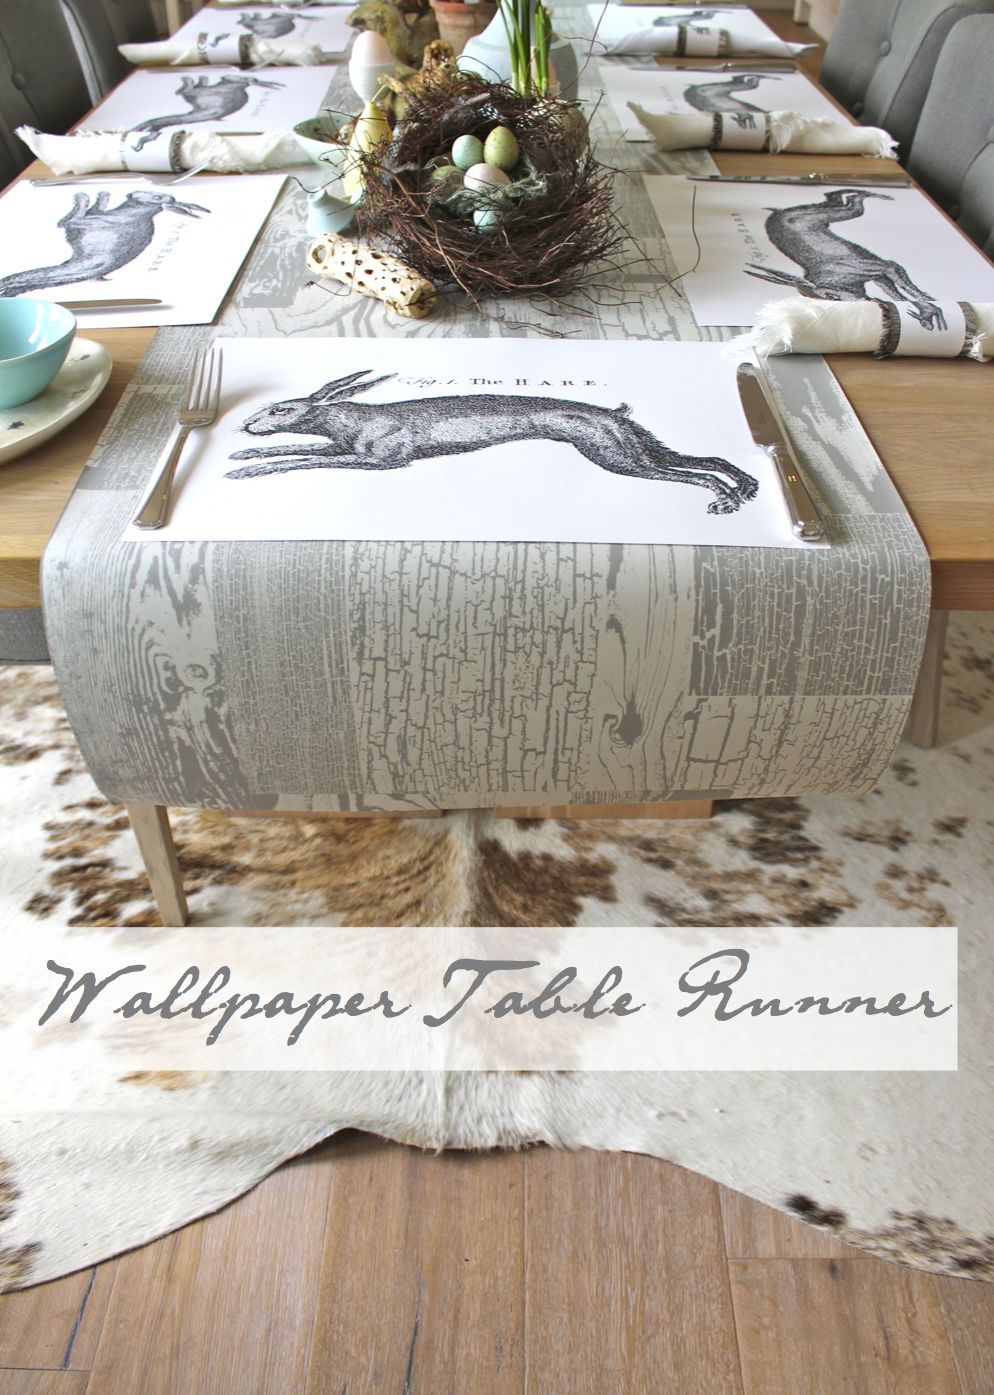 Kate's « table Space  wallpaper runner pinterest Creative tablecloth